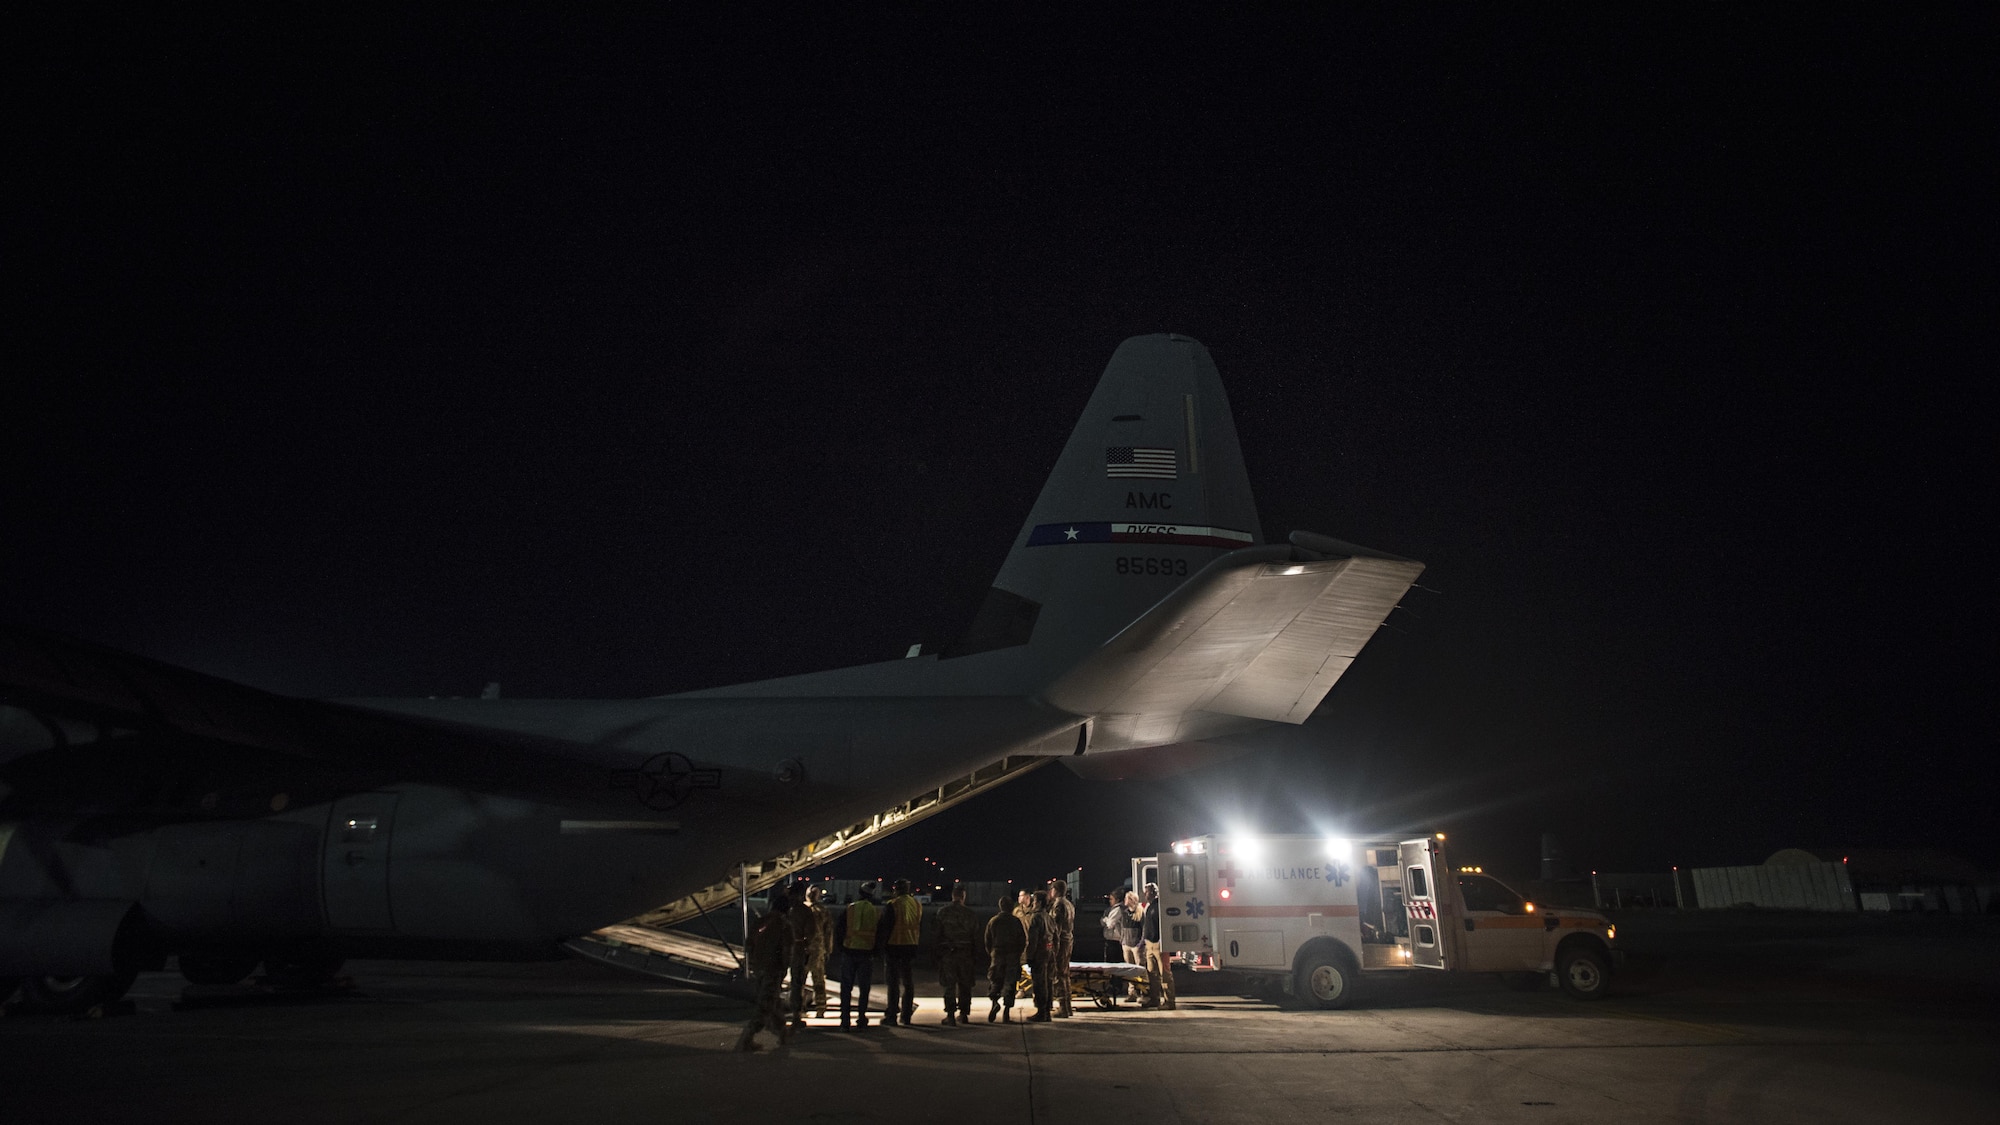 Members of the 455th Expeditionary Aeromedical Evacuation Squadron carry a patient from a C-130J Hercules to a waiting ambulance at Bagram Airfield, Afghanistan, Feb. 22, 2017. Patients are at their most vulnerable while being transported, so aeromedical evacuation technicians are trained in providing continuous stabilization, advanced care and life-saving intervention techniques in flight. (U.S. Air Force photo by Staff Sgt. Katherine Spessa)